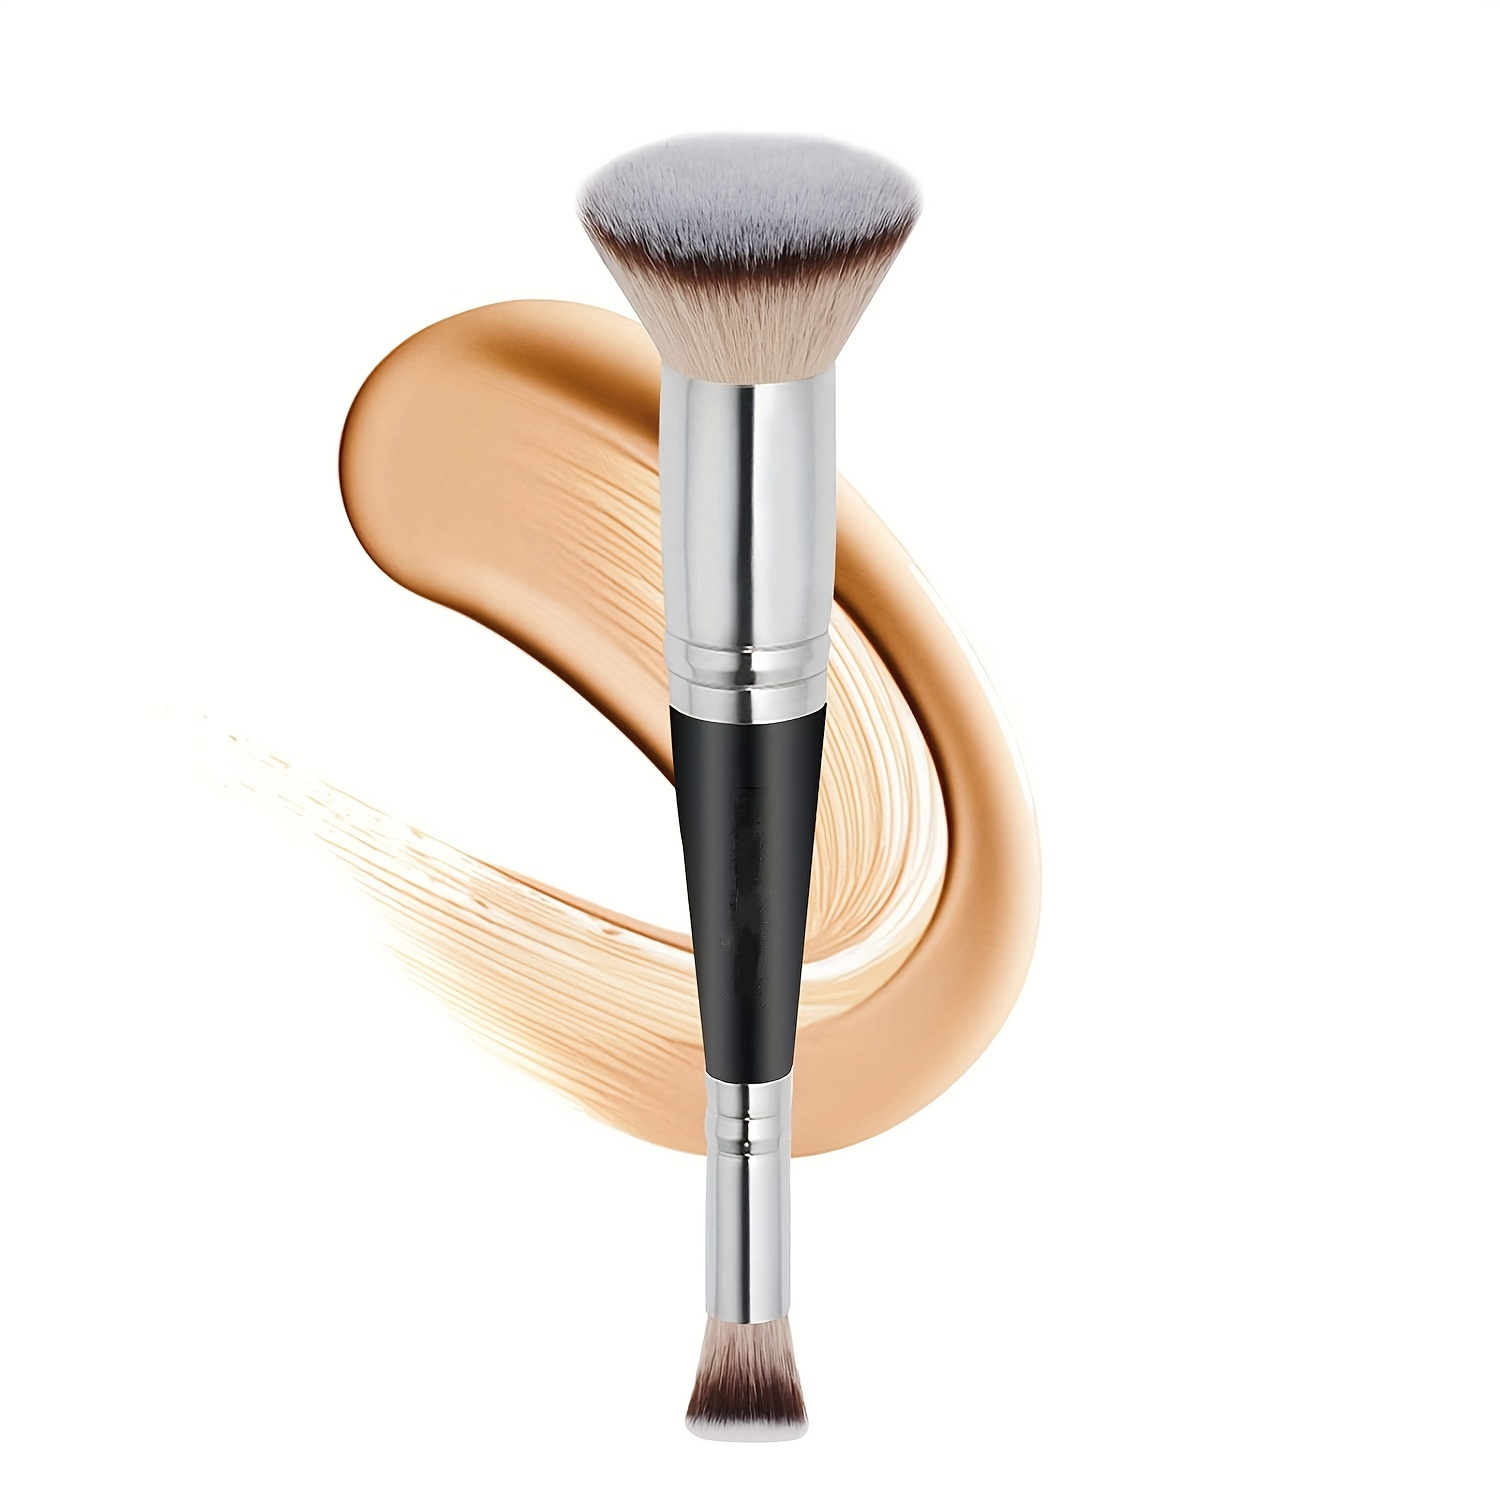 

Premium Dual-ended Foundation Brush For Flawless Makeup Application - Perfect For Liquid, Cream, And Powder - Ideal For Concealer And Blending